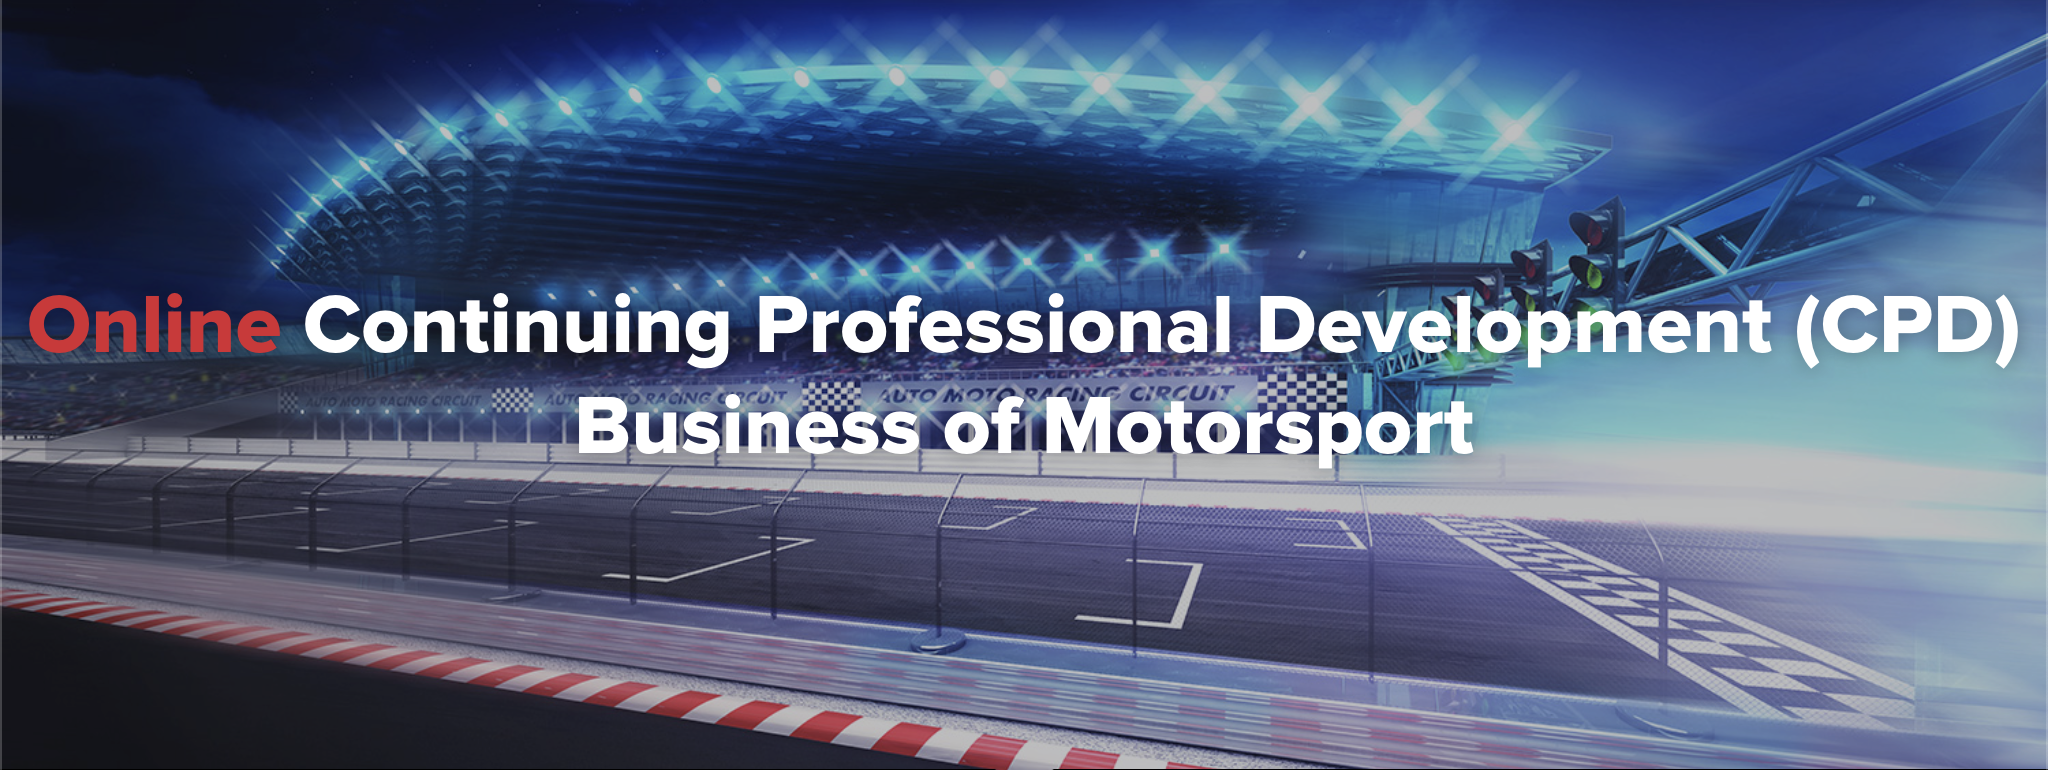 Online Continuing Professional Development (CPD) Business of Motorsport